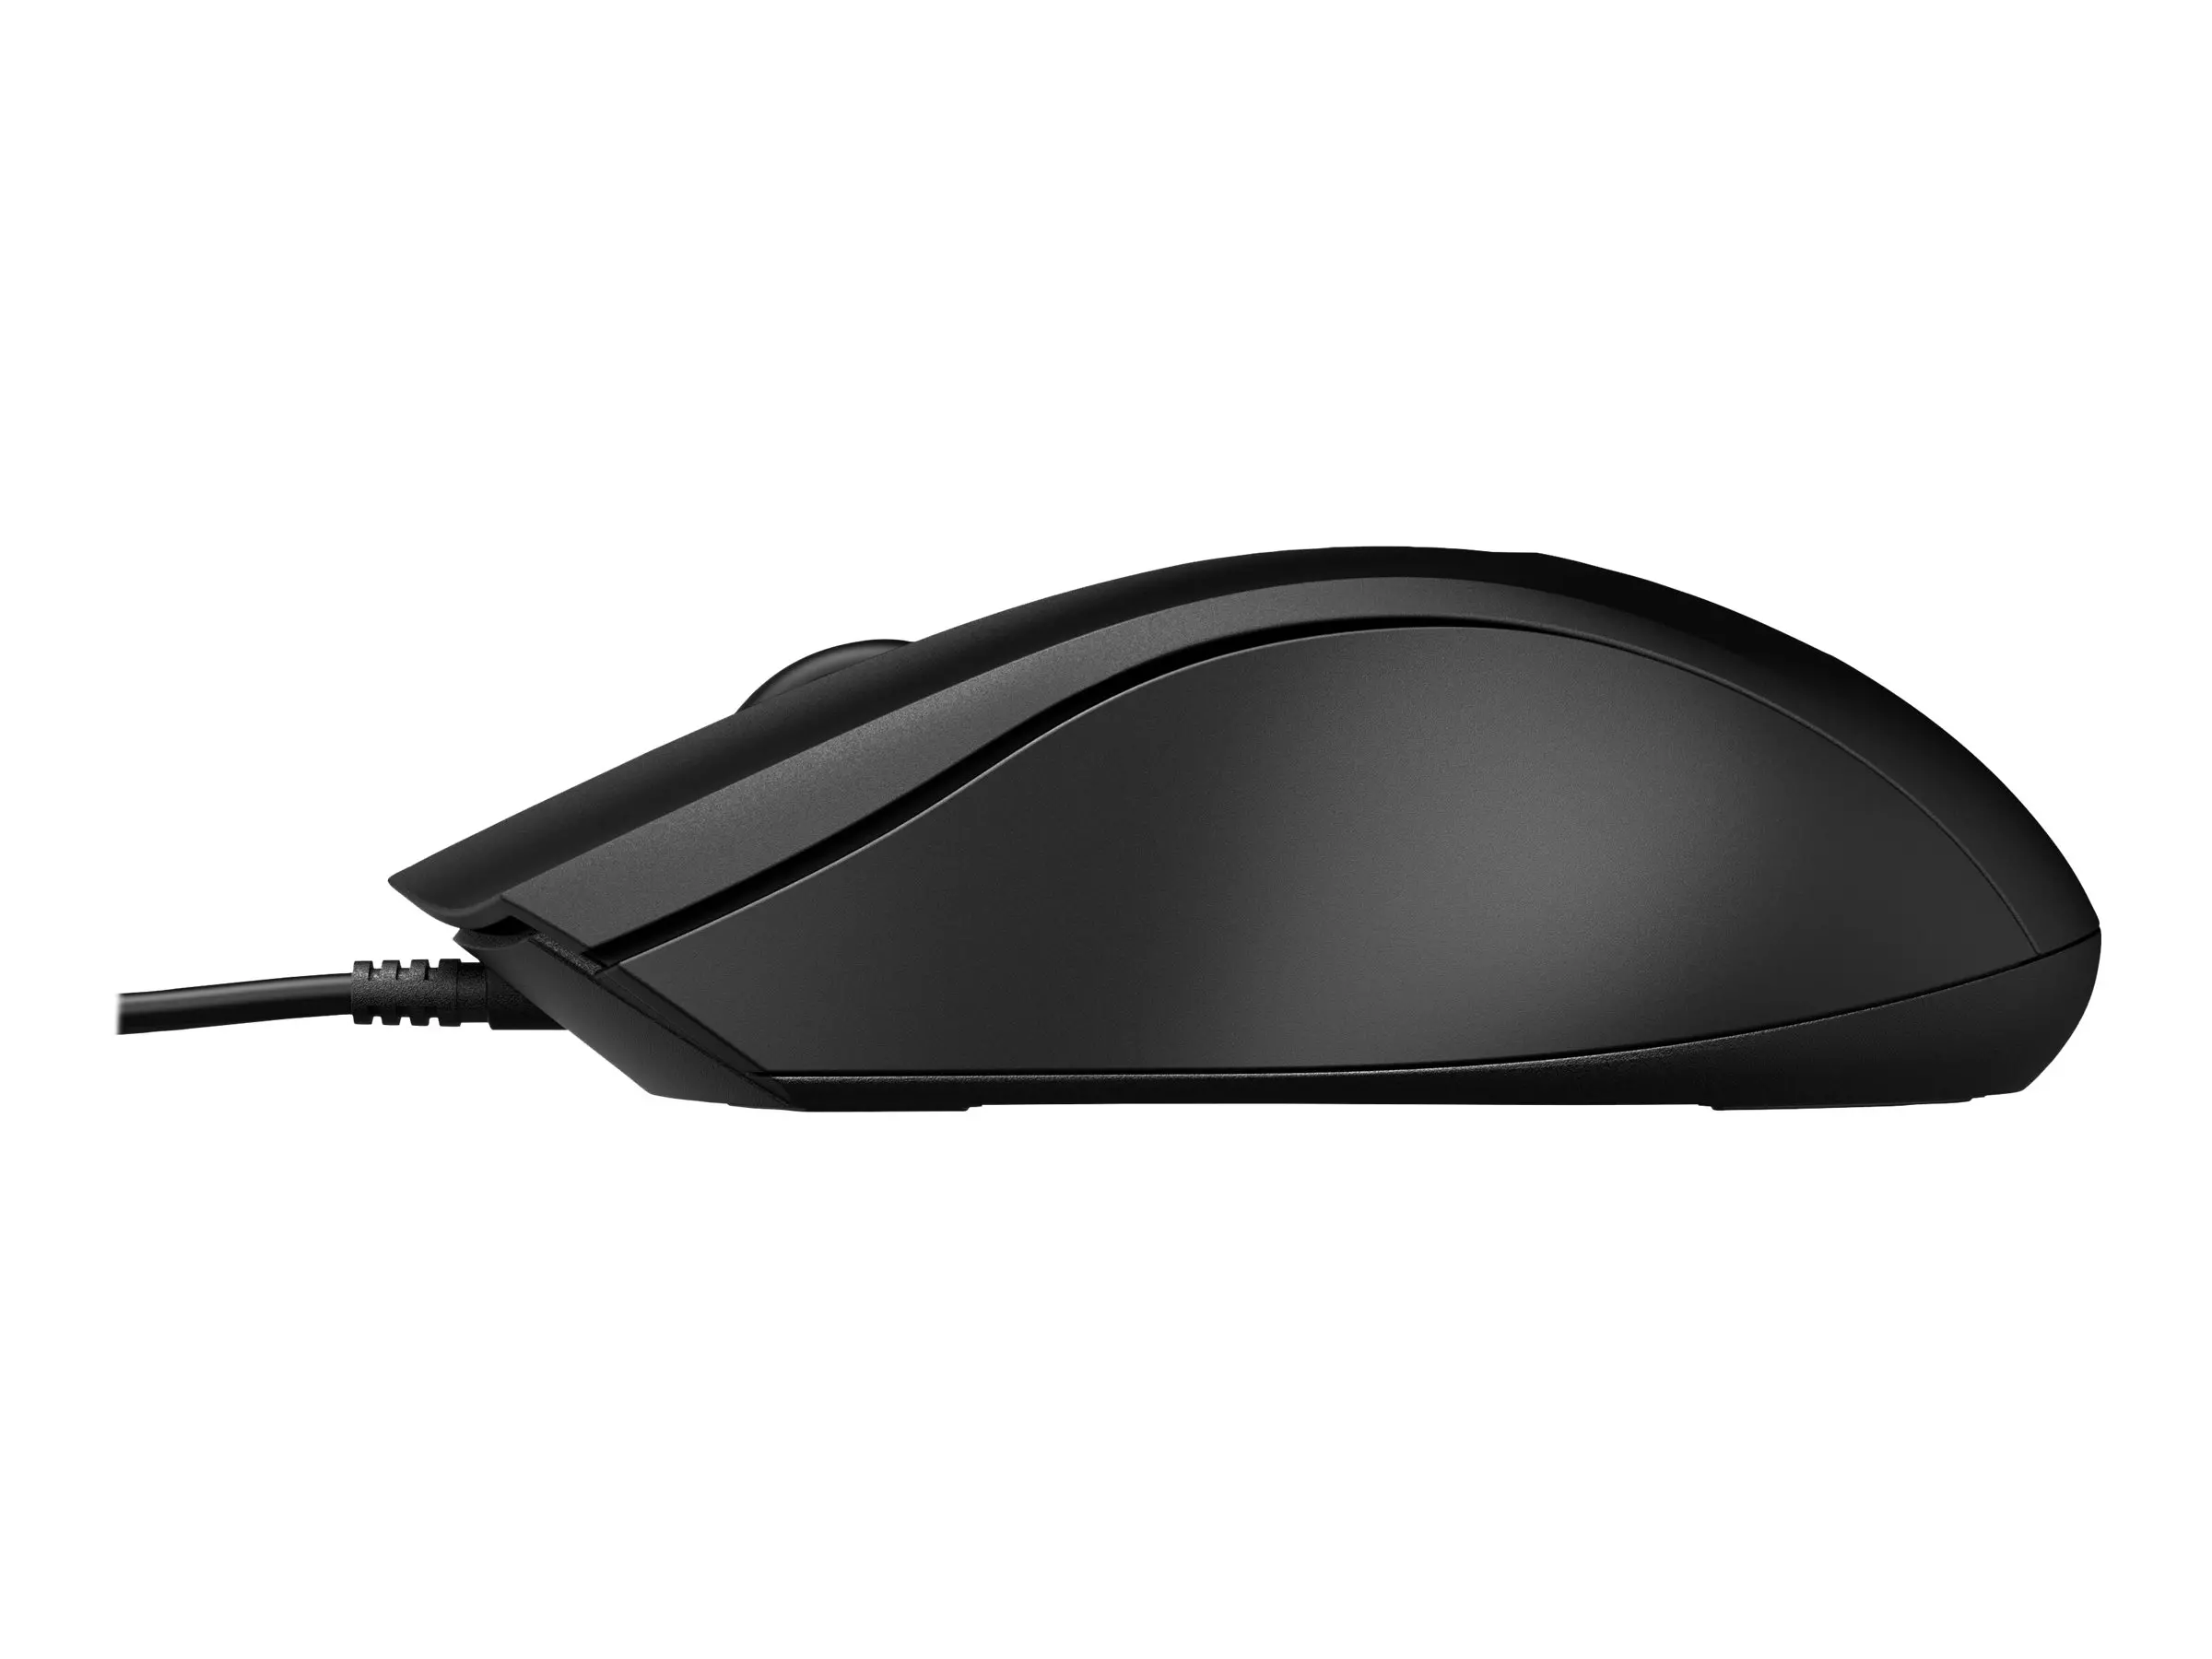 HP 100 BLK WRD Mouse - image 3